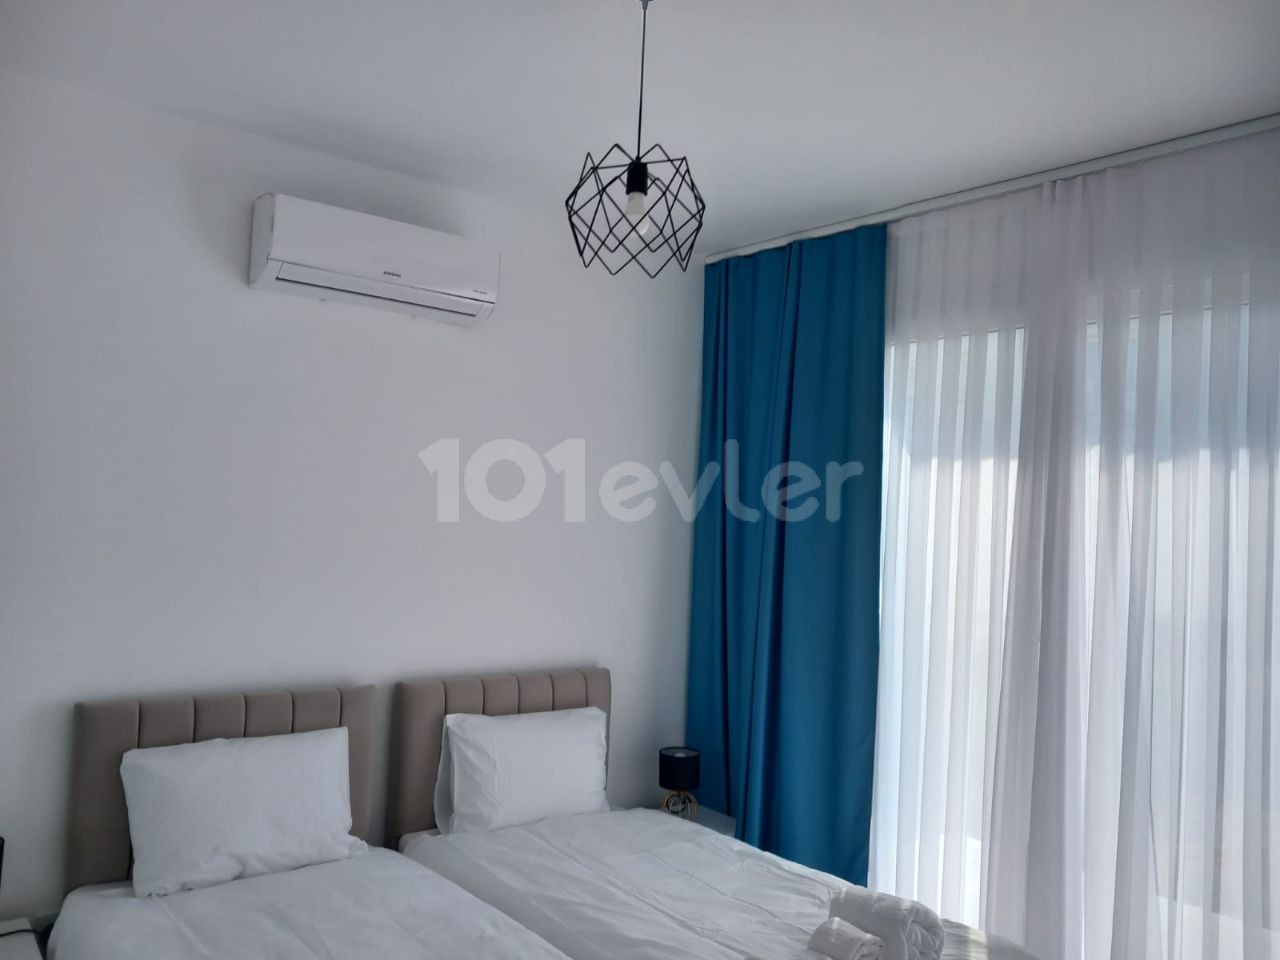 New 2+1 Fully Furnished Flat For Rent Inside A Complex Located In Bogaz, Iskele